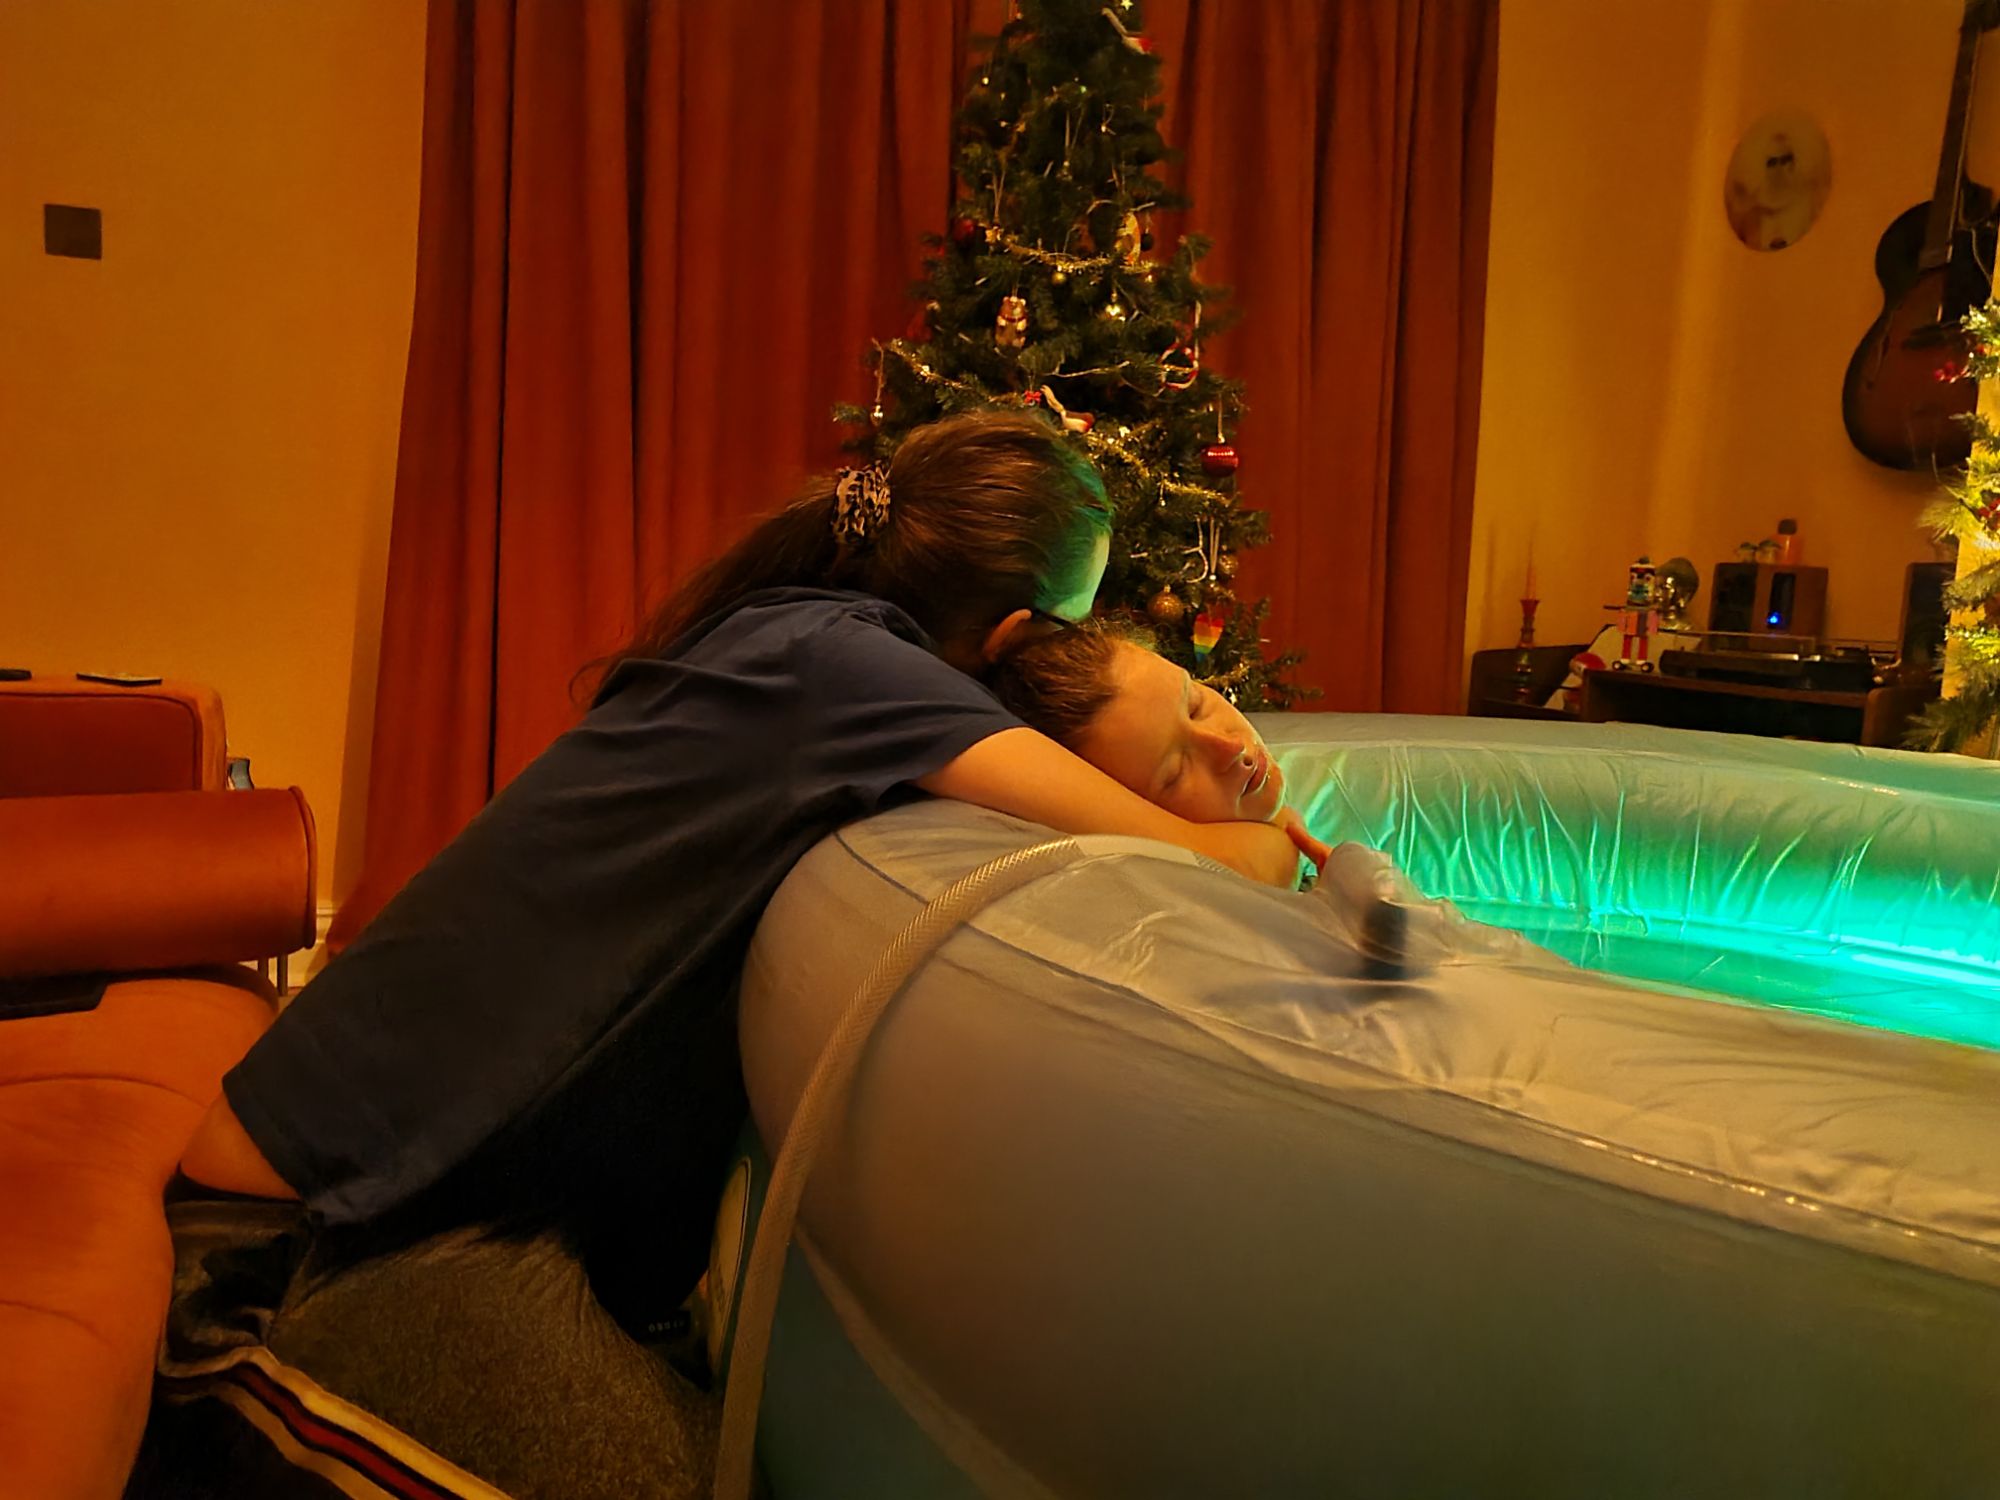 A regular pool in a client's living room. A woman is reclining back against the side with her eyes closed, and her partner is hugging her shoulders from outside the pool. The pool is lit up with green light and there is a decorated Christmas tree in the background.